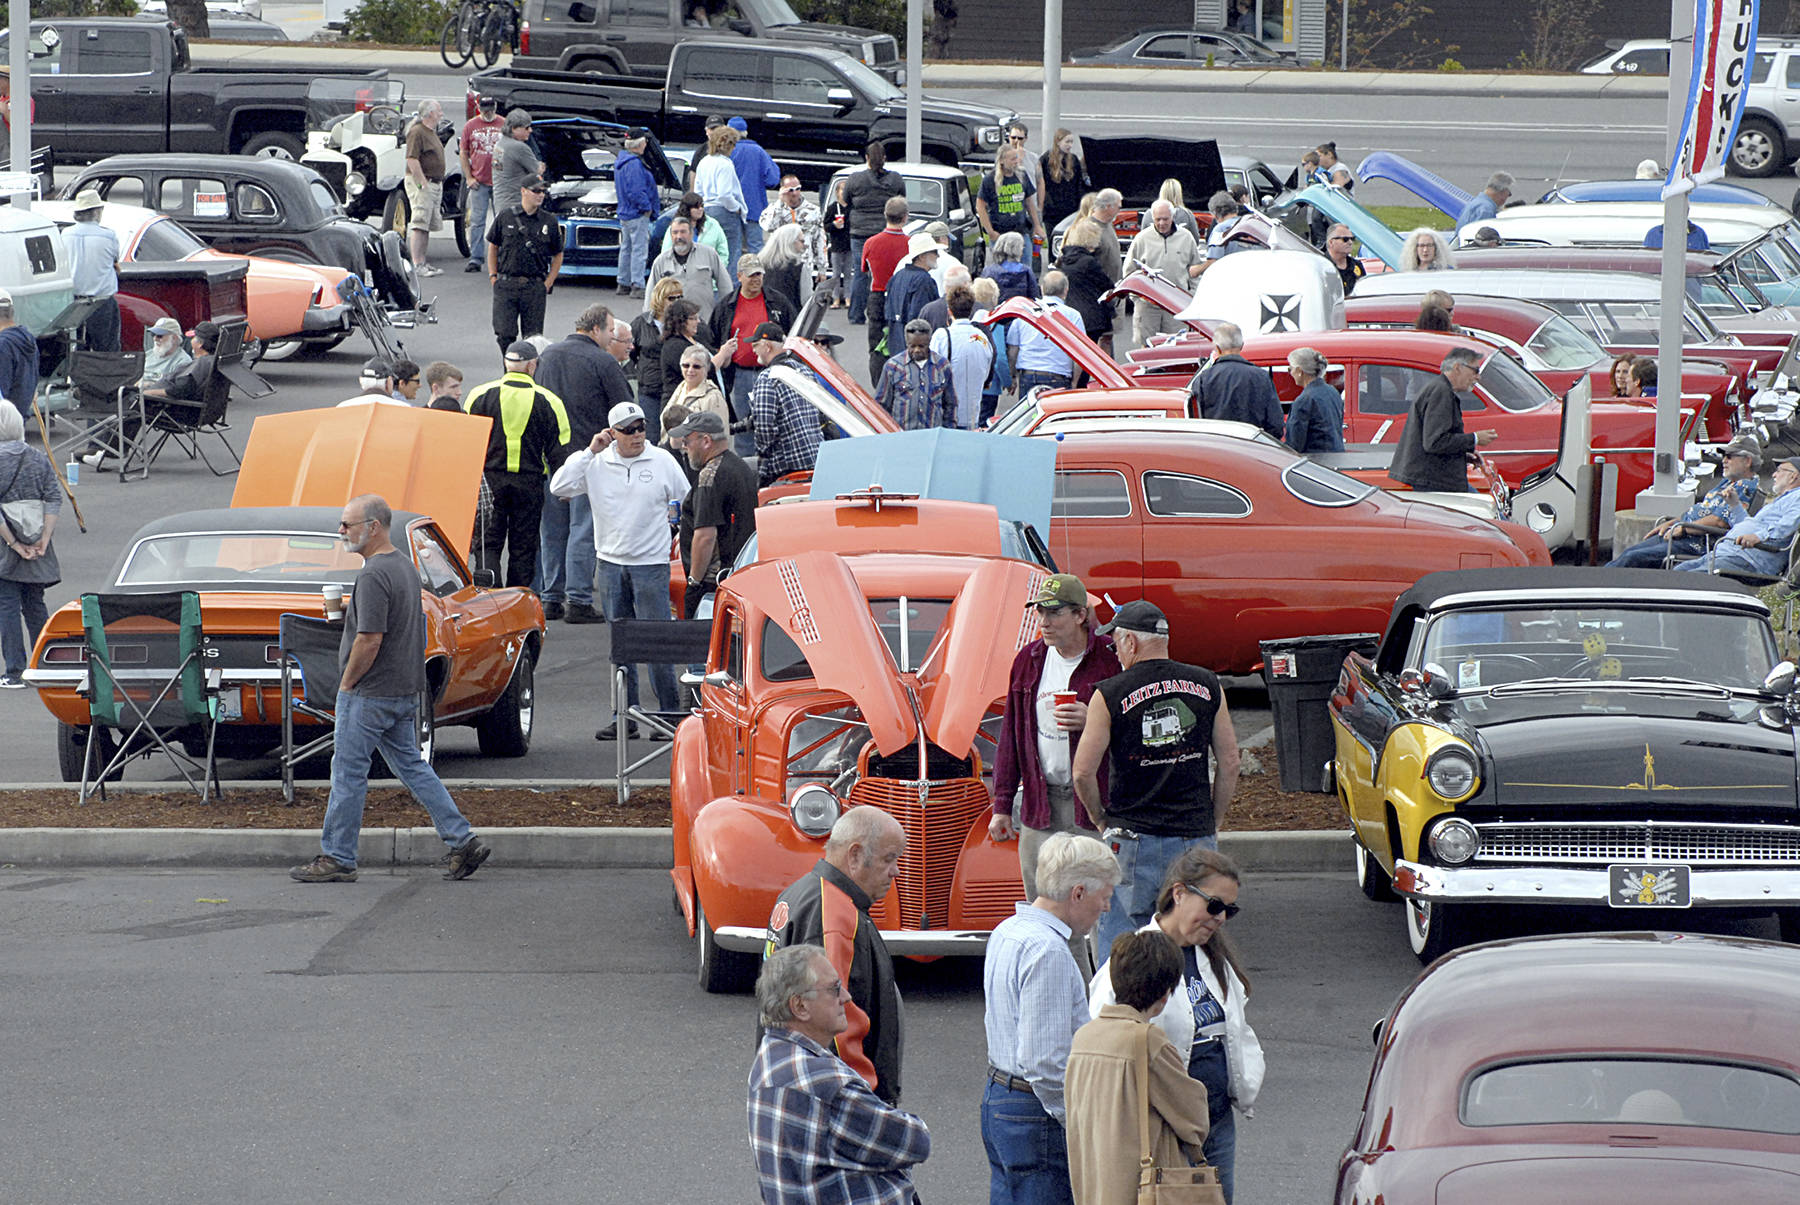 Annual Ruddell Cruise-In set for Friday